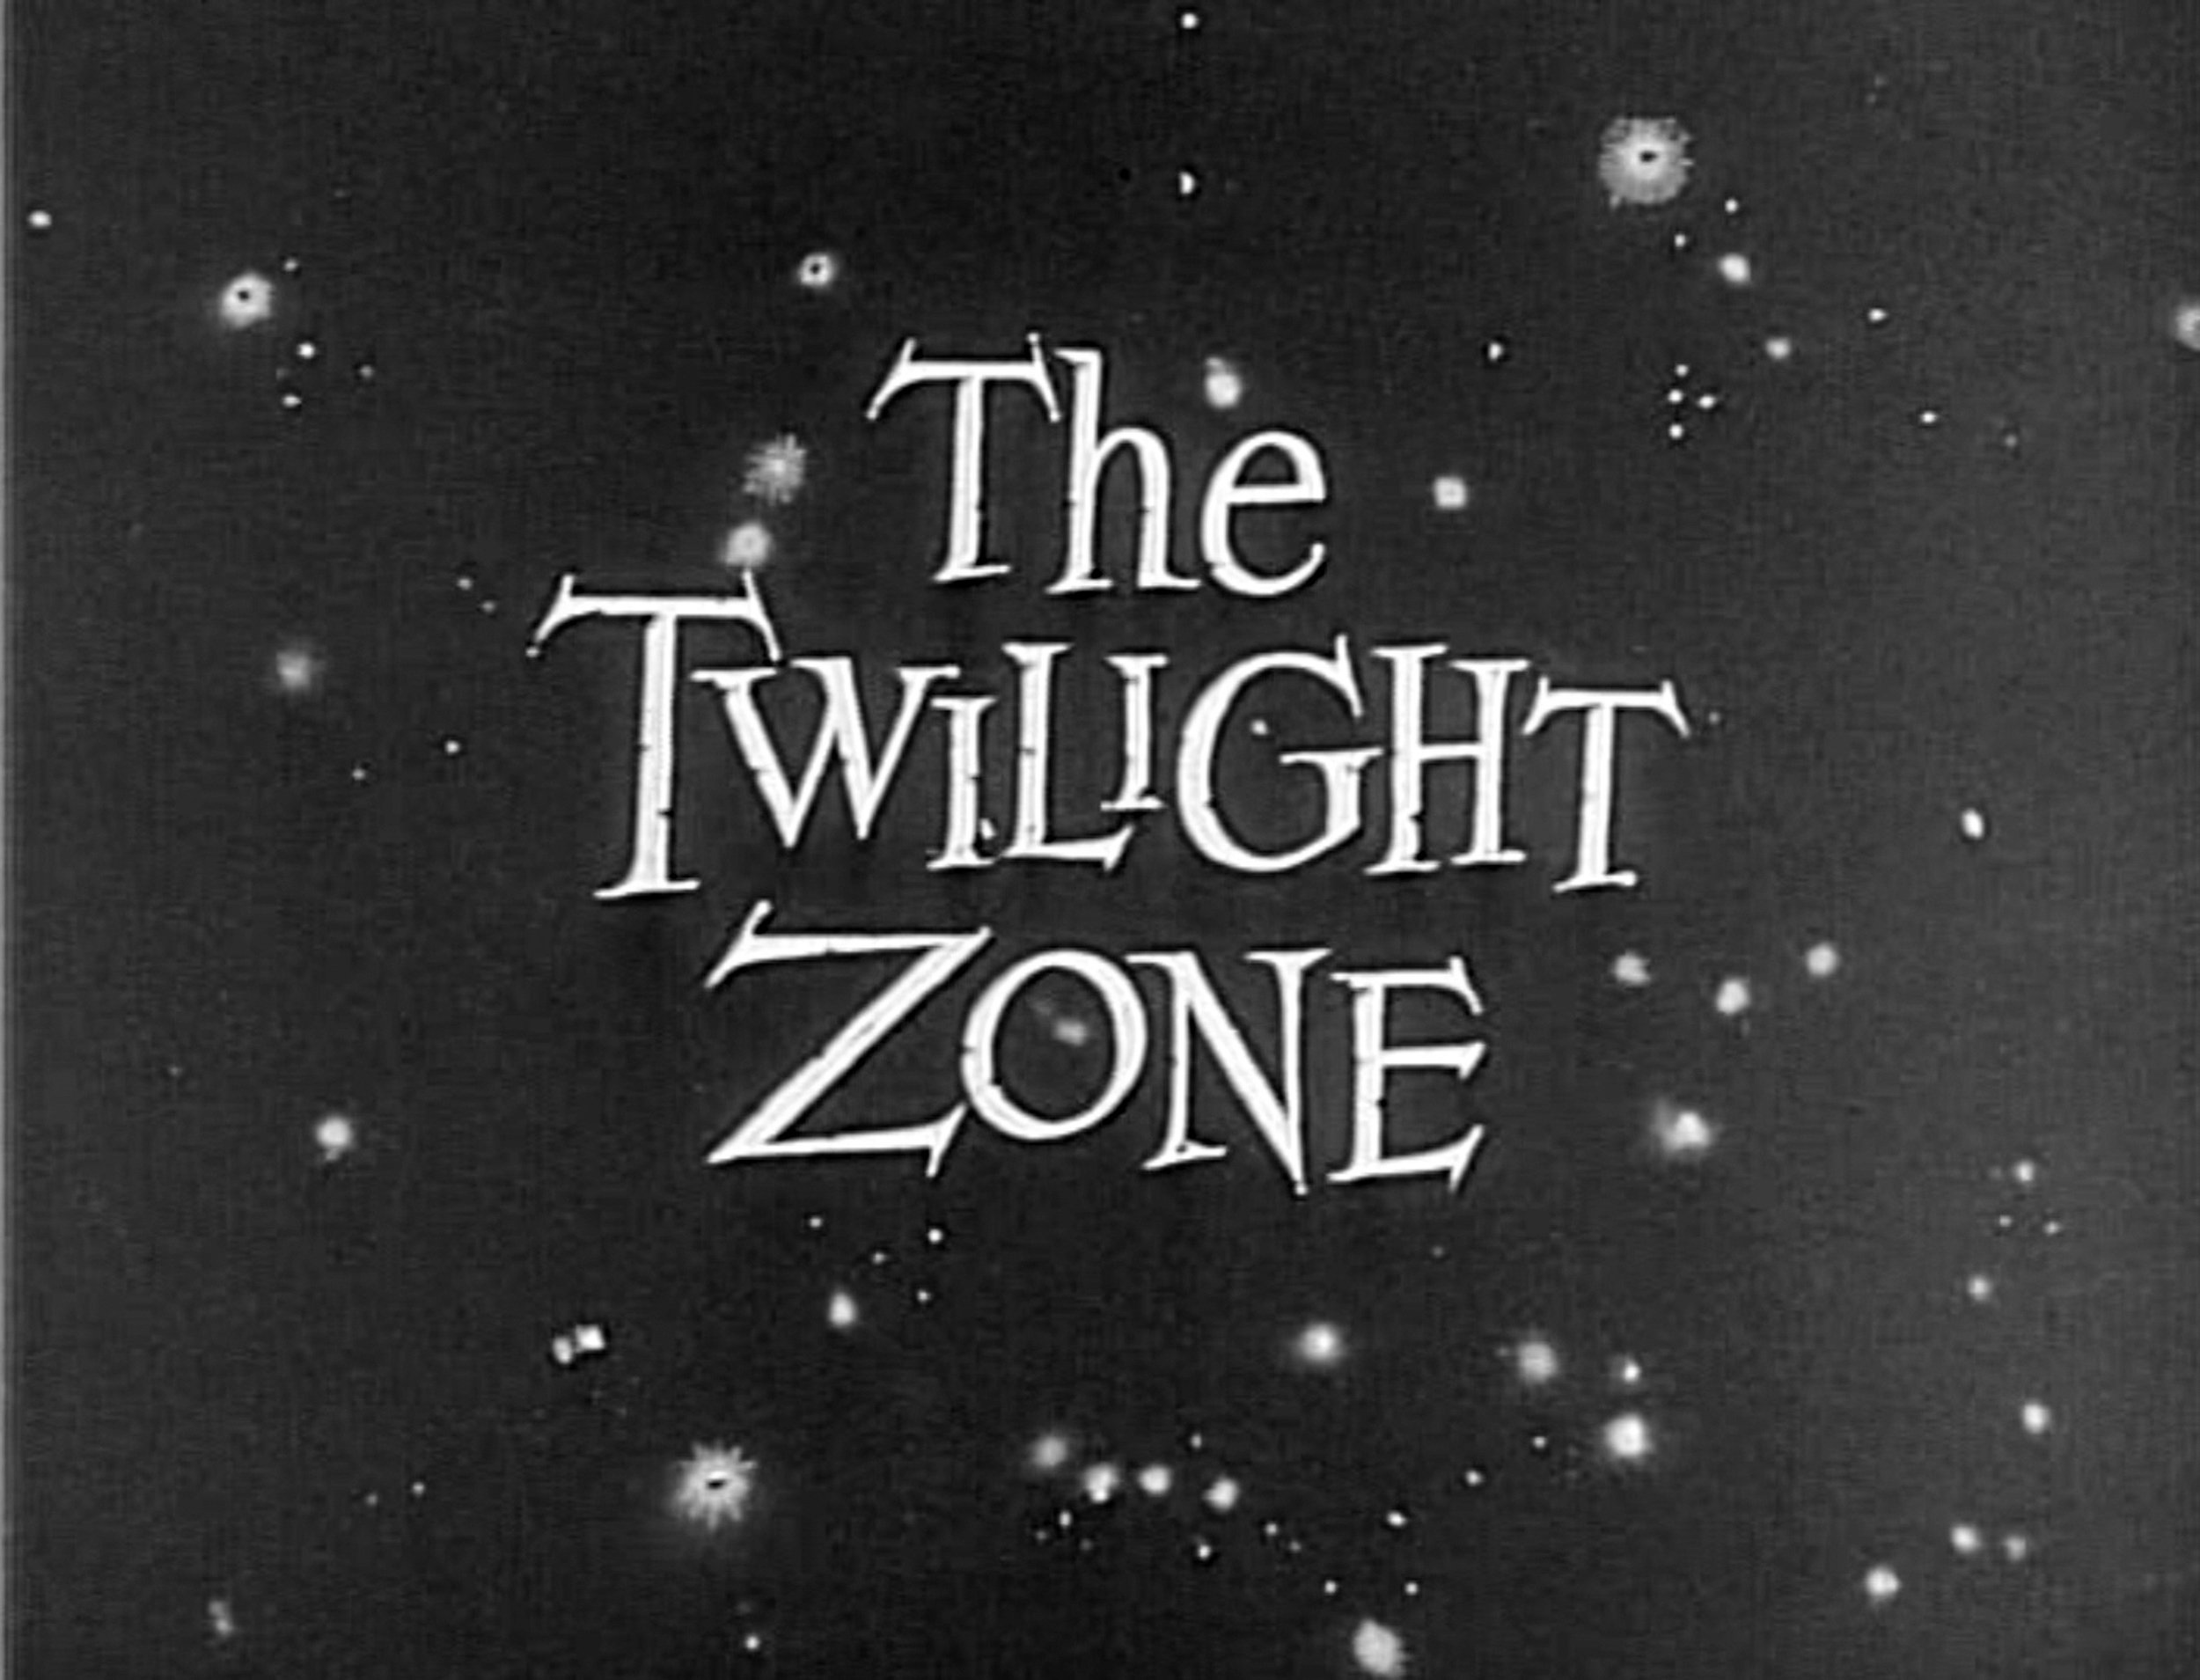 PONTIN  'The Twilight Zone:' Yesterday and Today - The Cornell